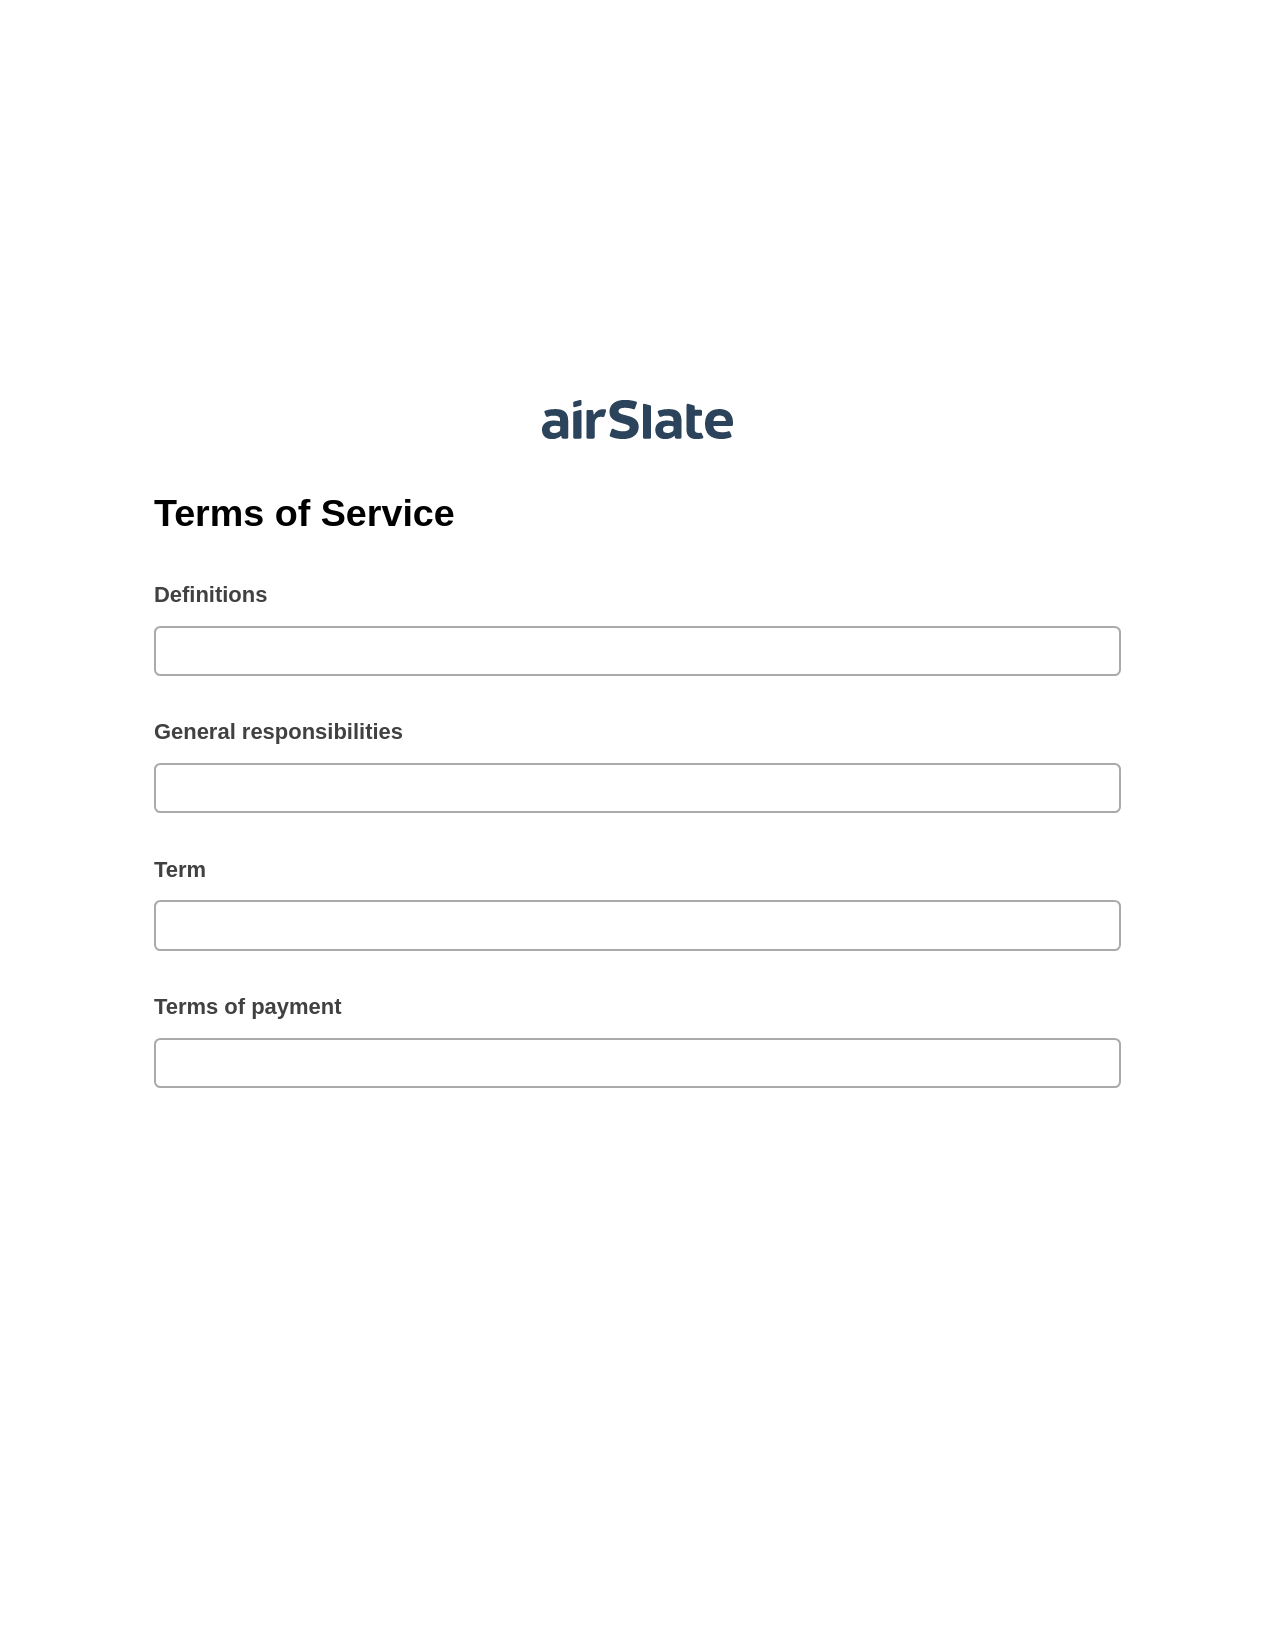 Terms of Service Pre-fill from Google Sheet Dropdown Options Bot, Create slate addon, Export to Salesforce Bot